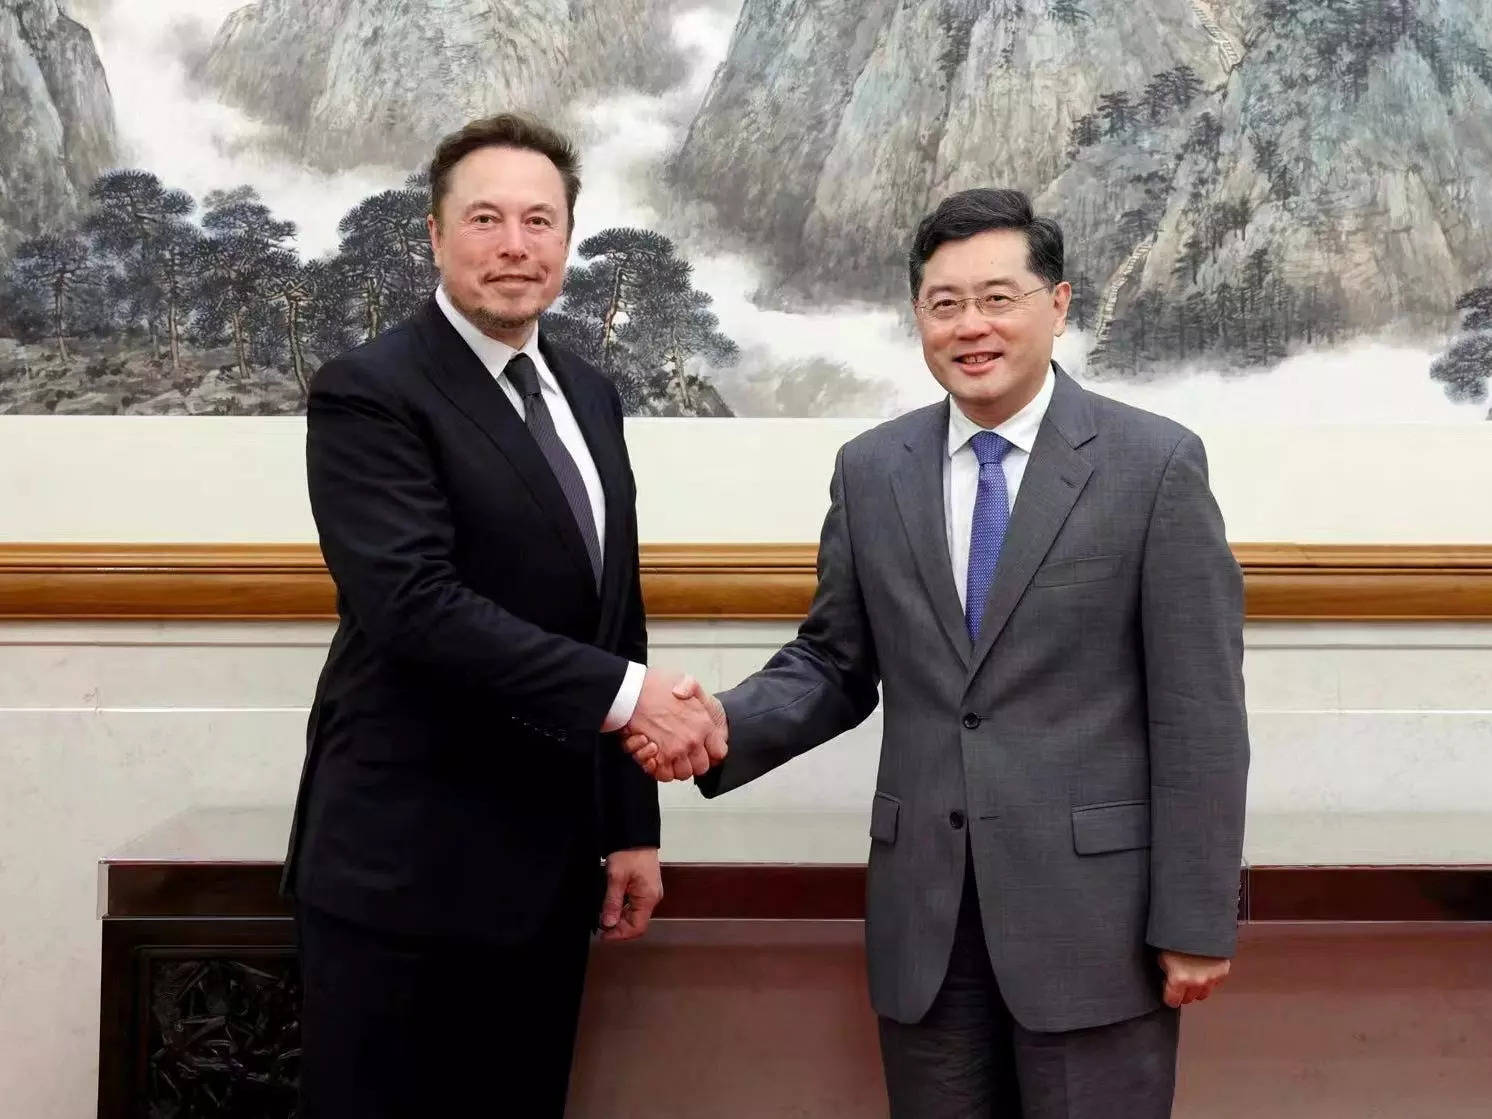 6 photos of Elon Musk's visit to China, from a 16-course dinner to meetings with Chinese officials